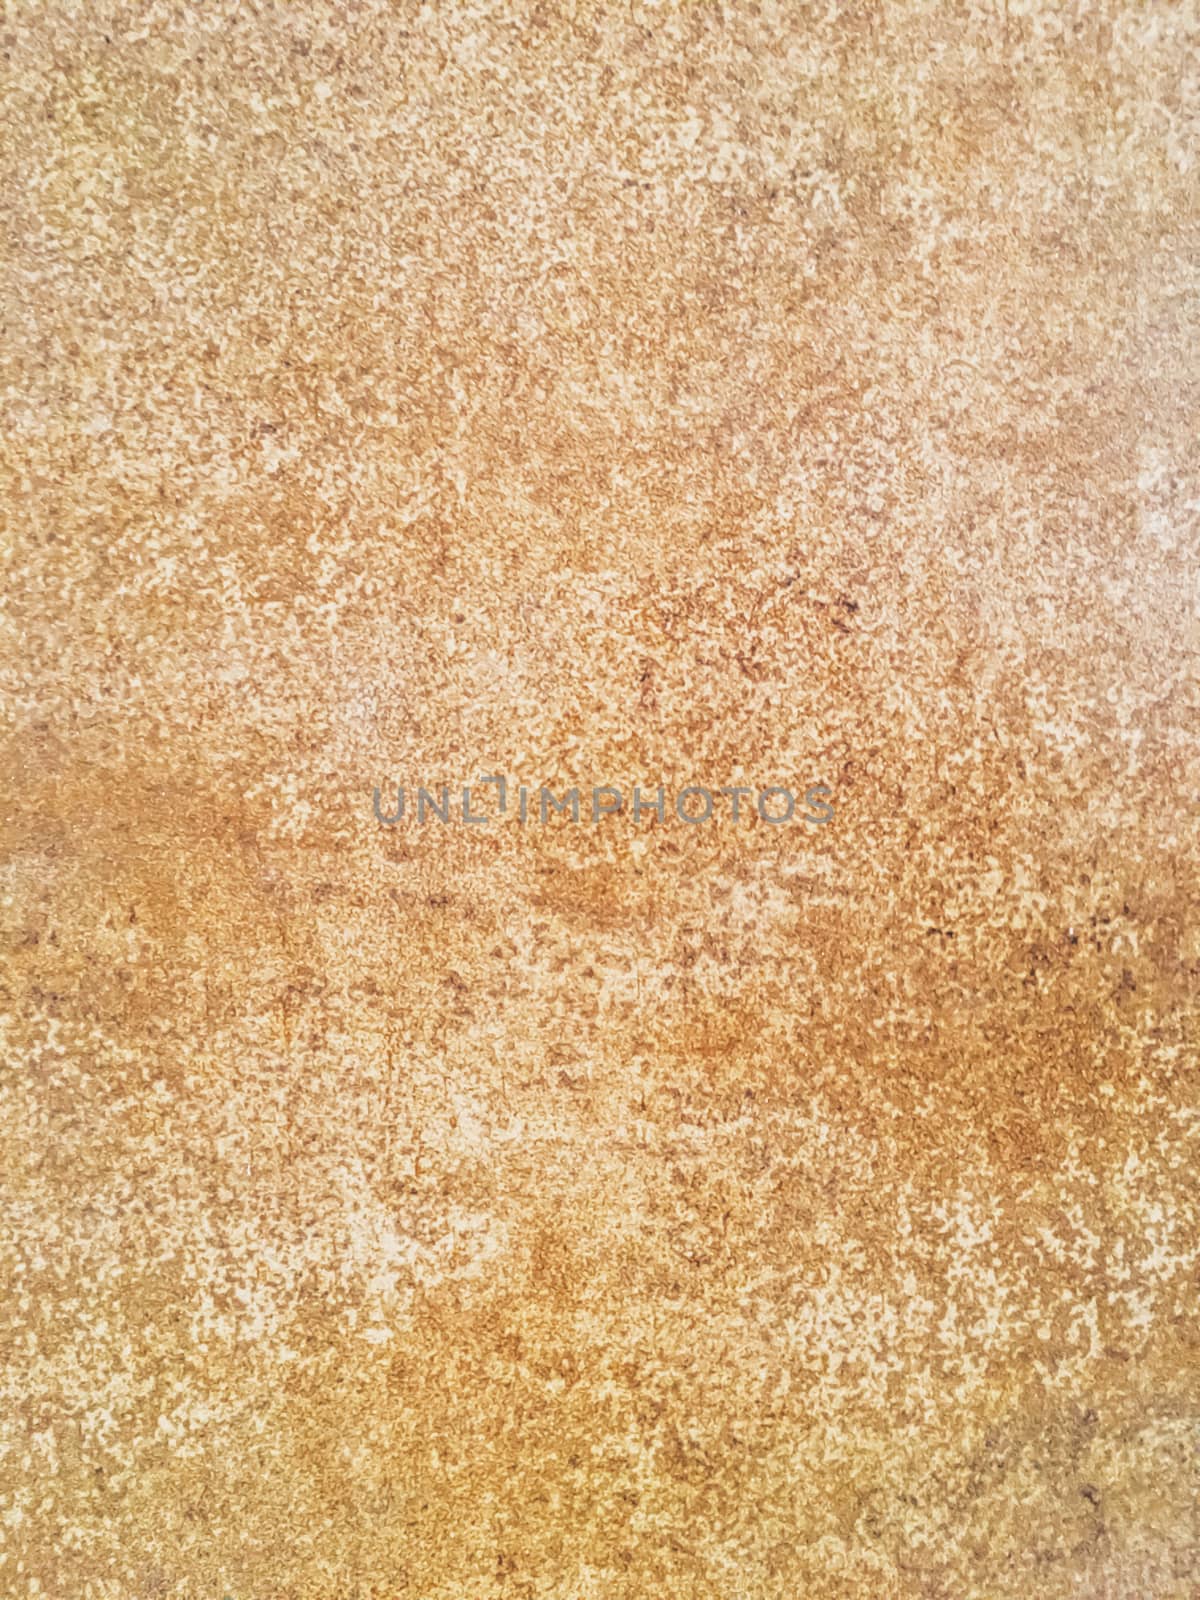 Luxury stone texture as background, design and material